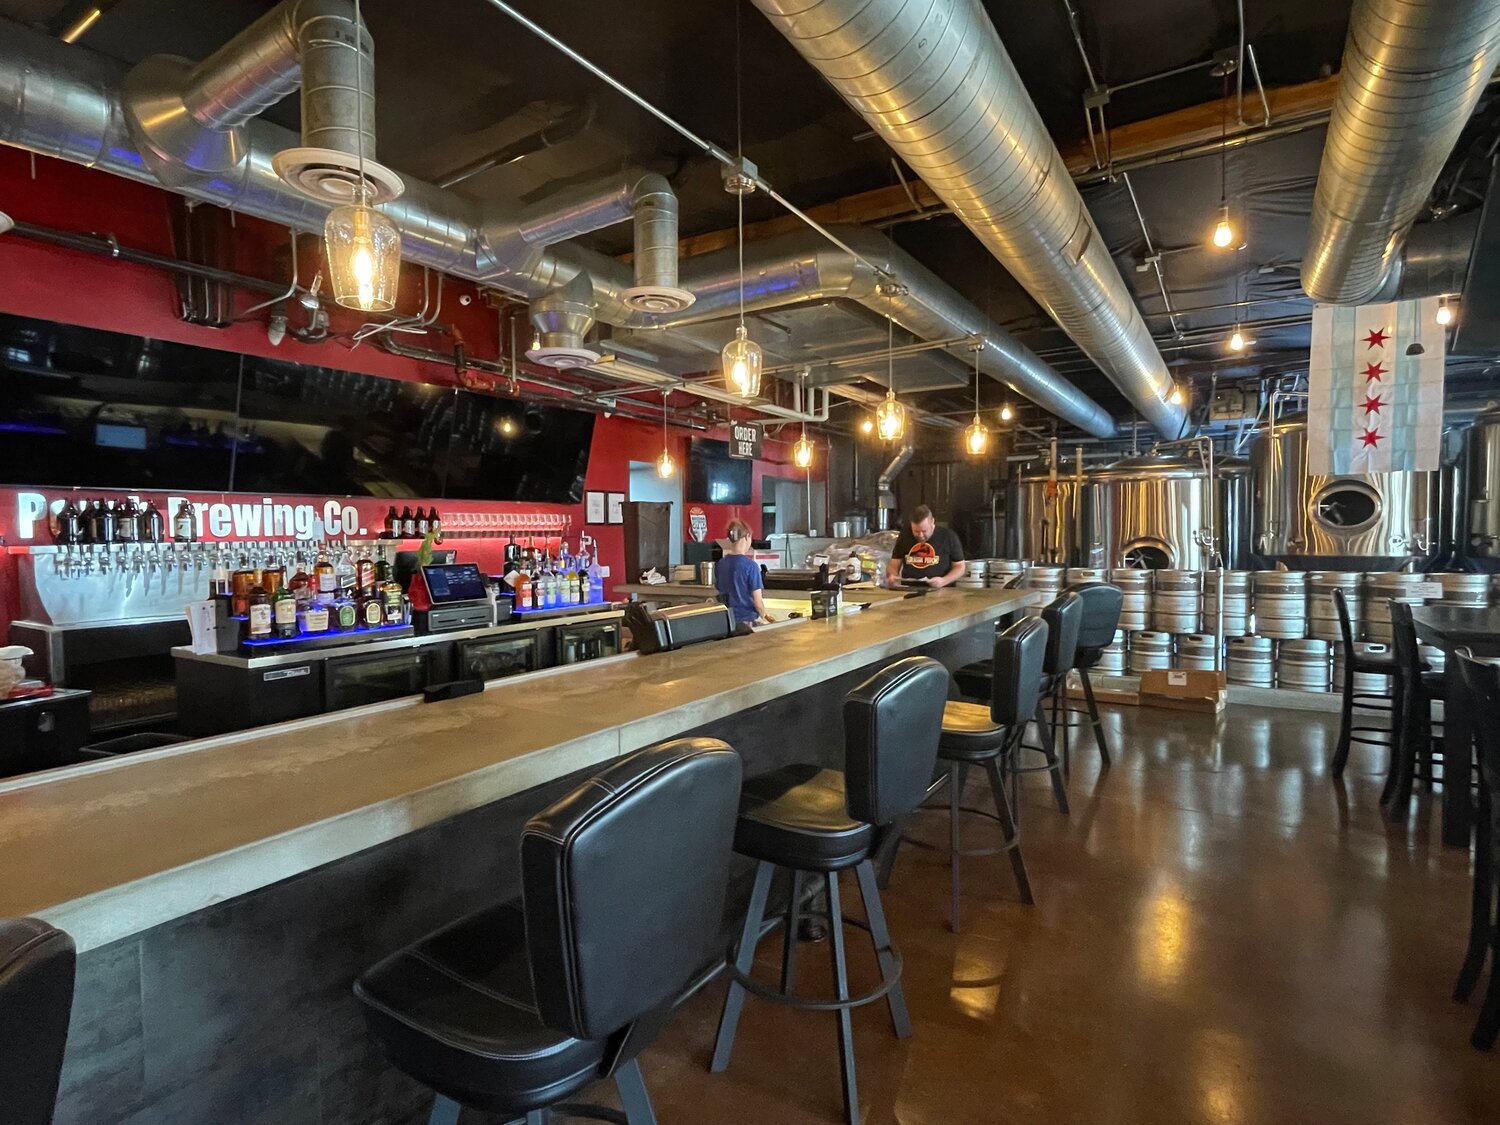 Perch Brewing Co. opened in the old Flying Basset Brewing location on Nov. 29.